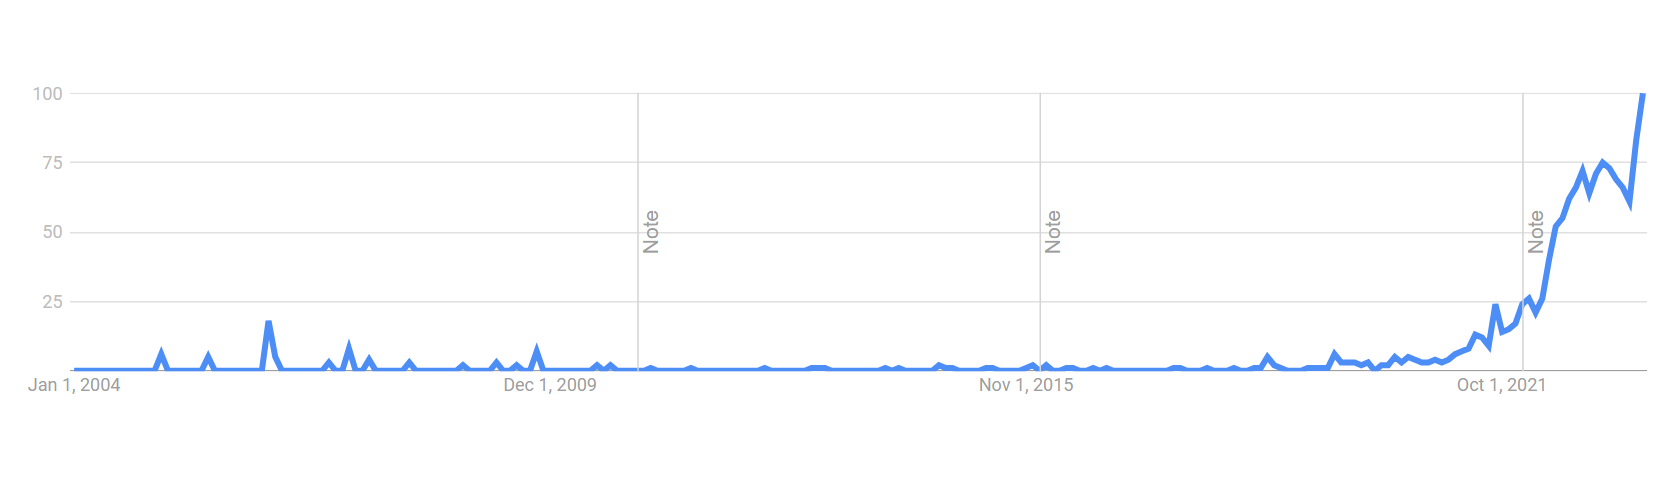 googel search trend that shows steady increase after 2020